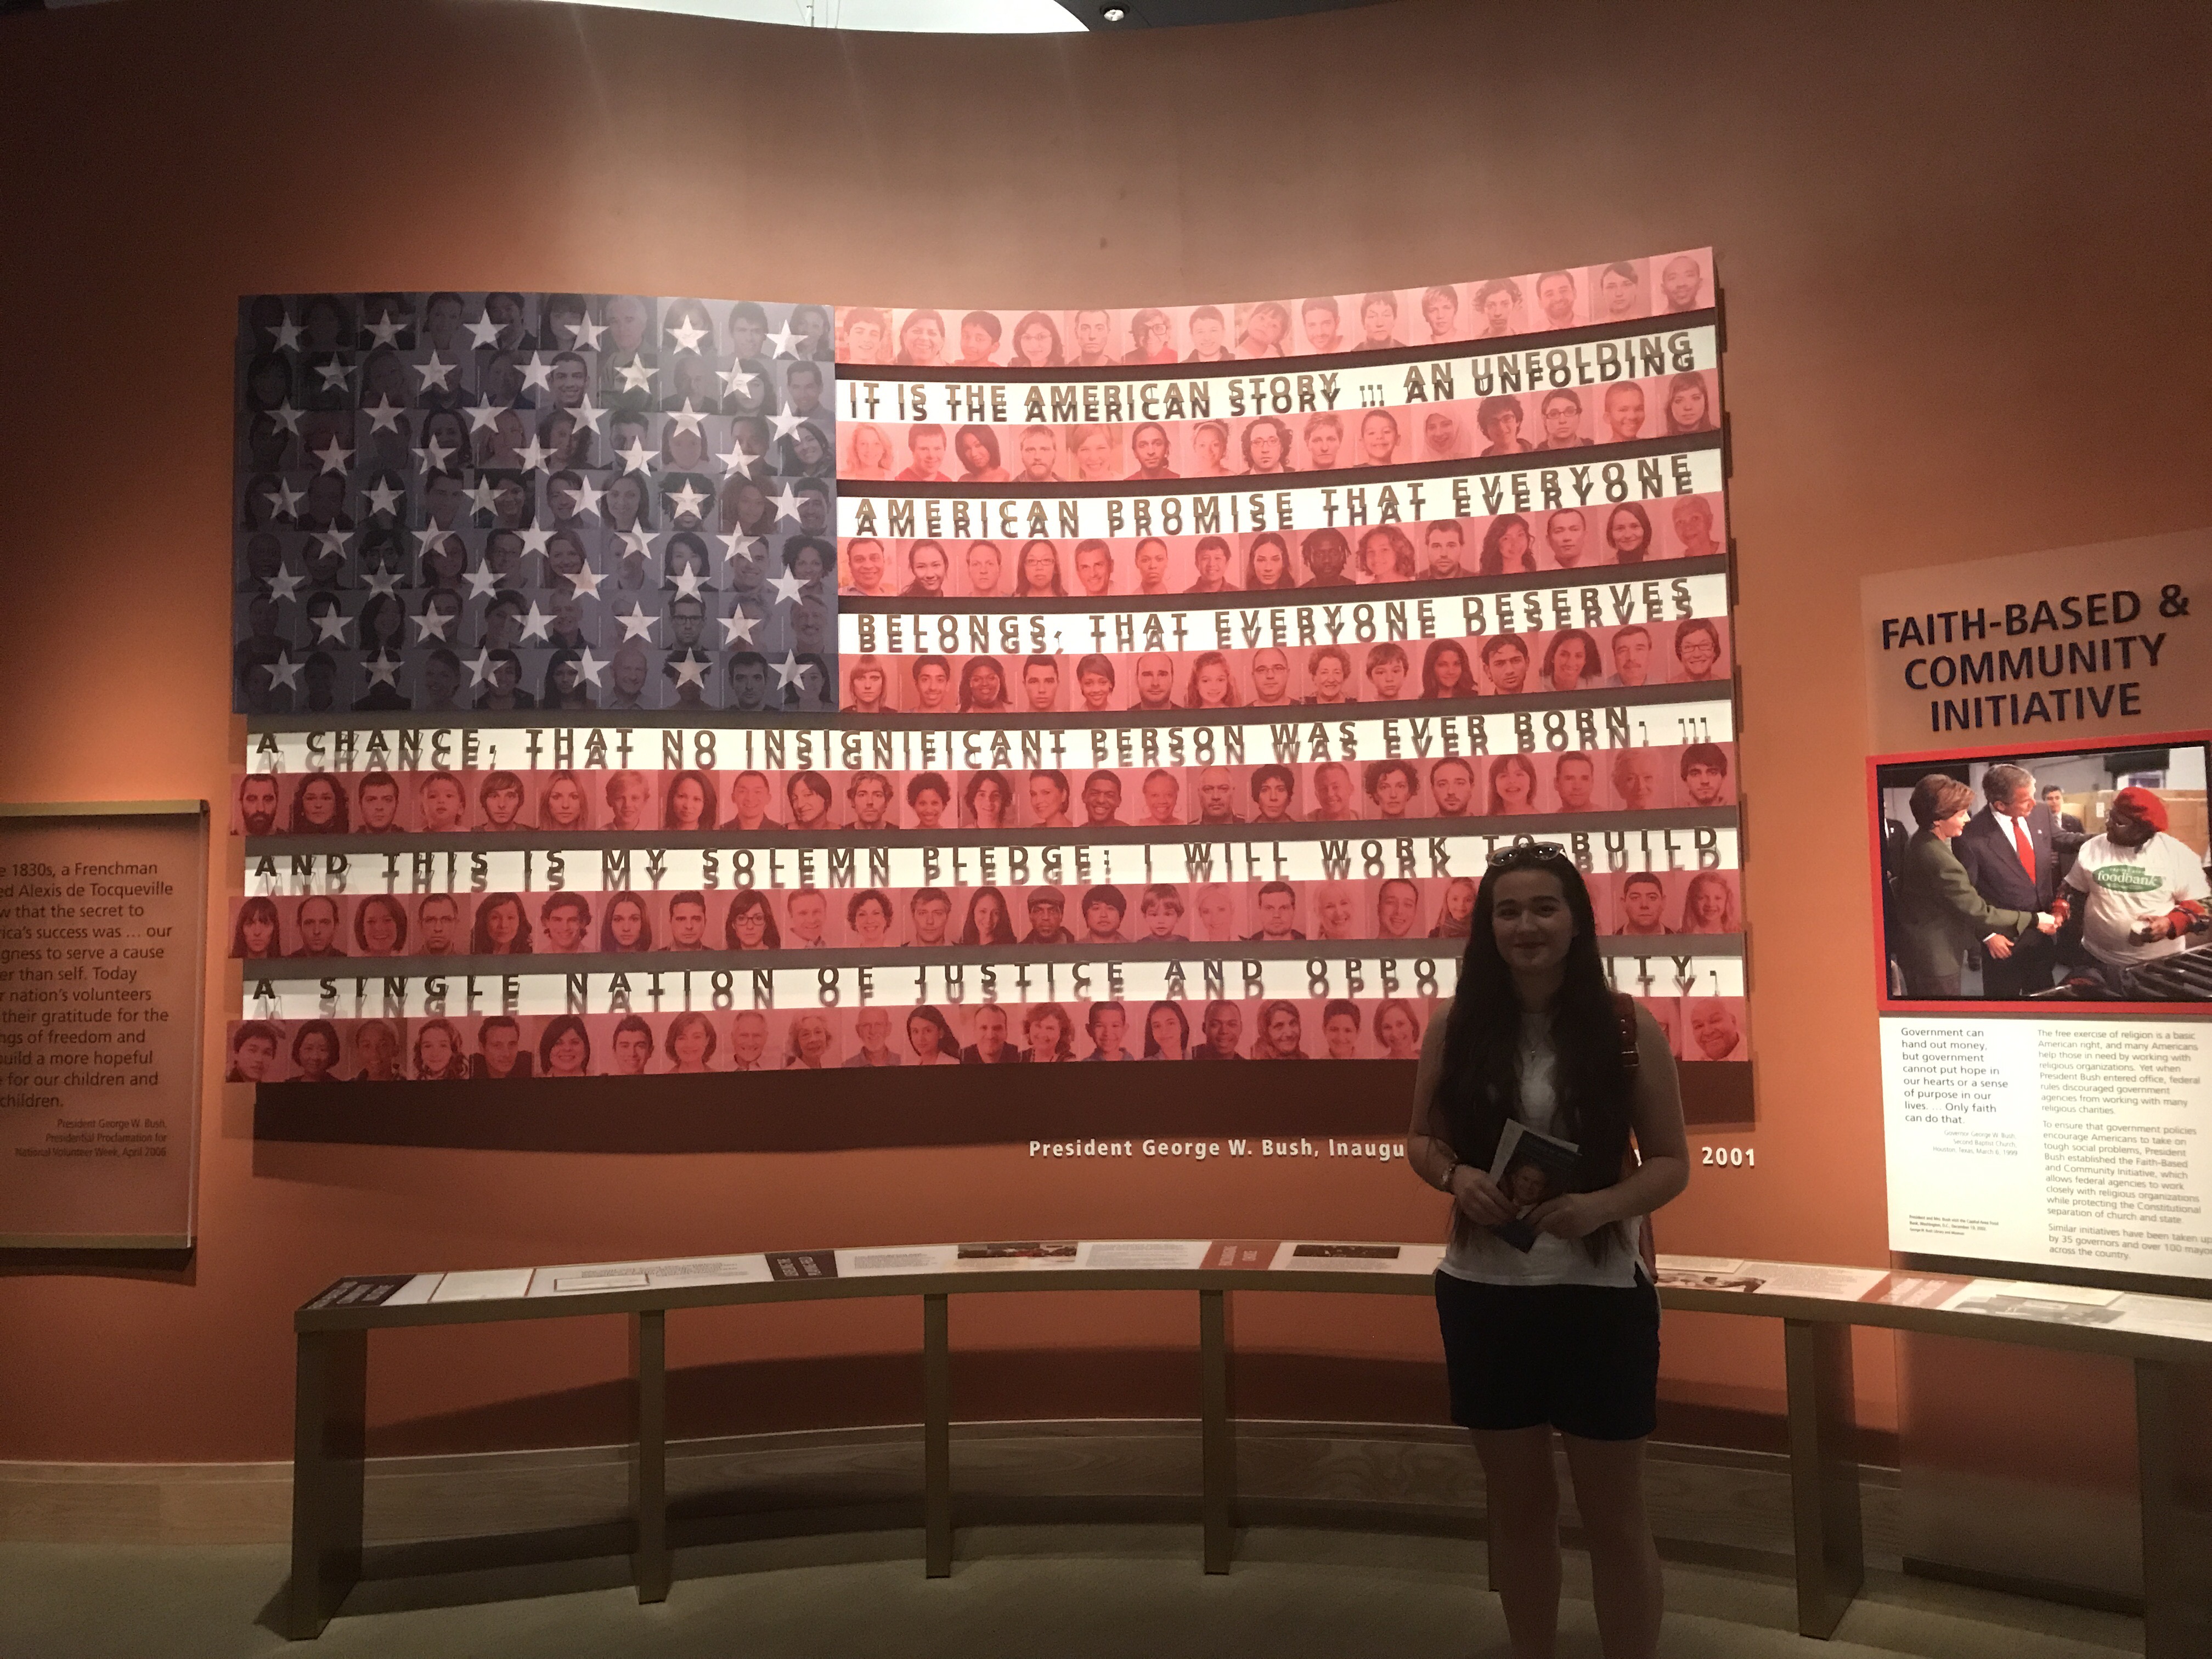 Katerine in front of the American flag at a museum.